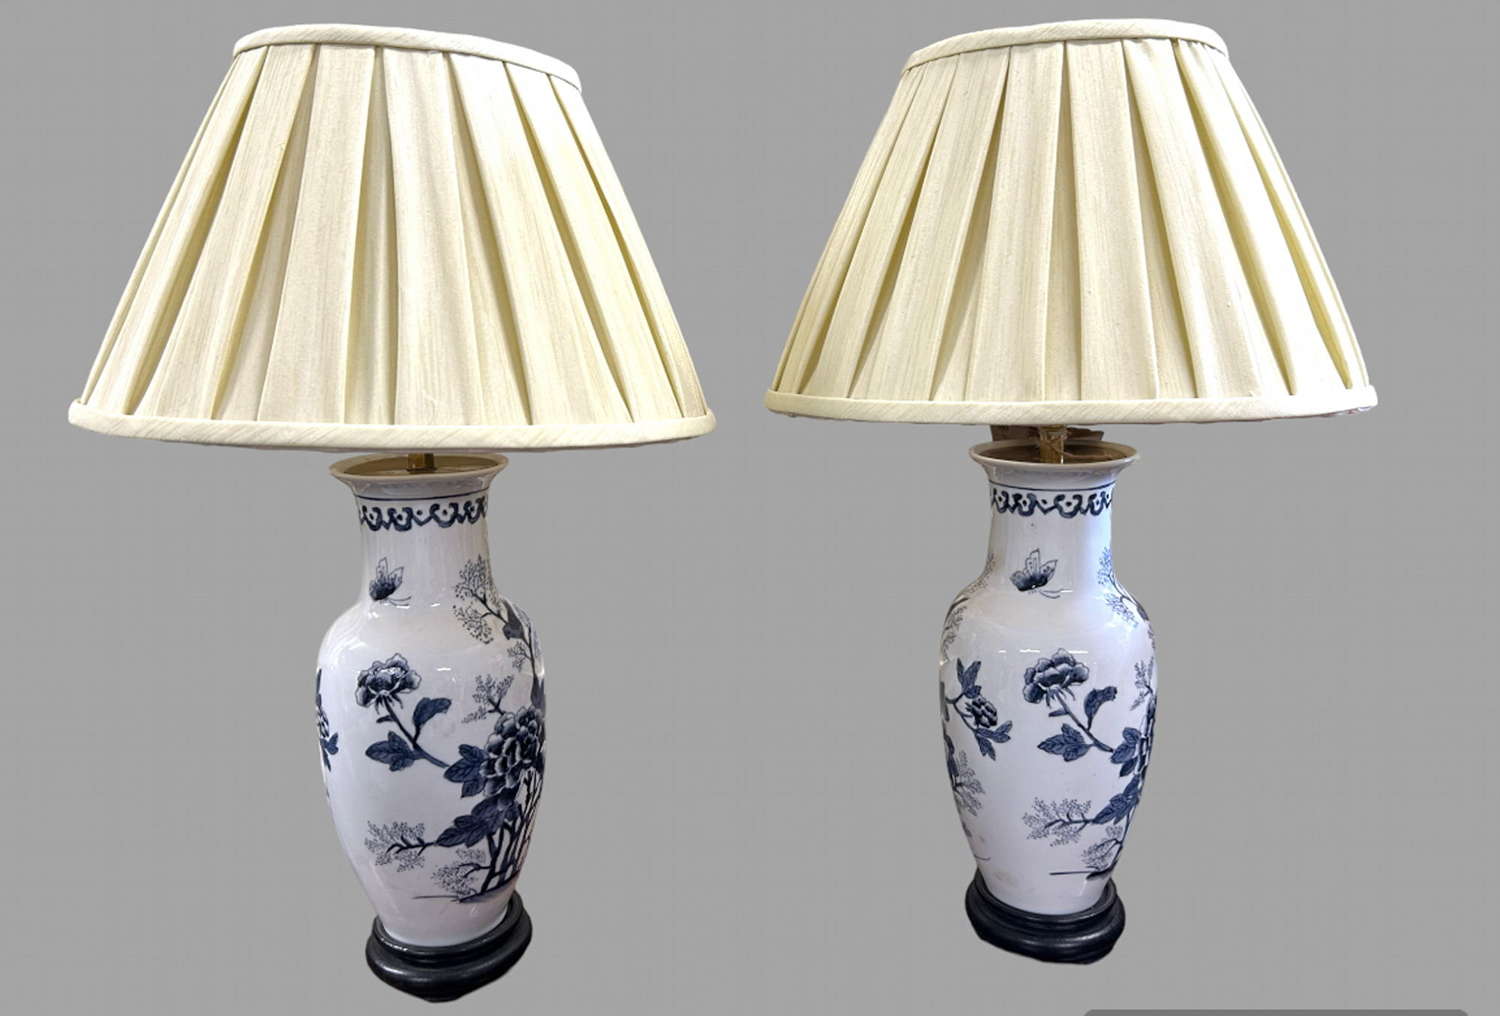 A Pair Of Blue and White Decorative Lamps